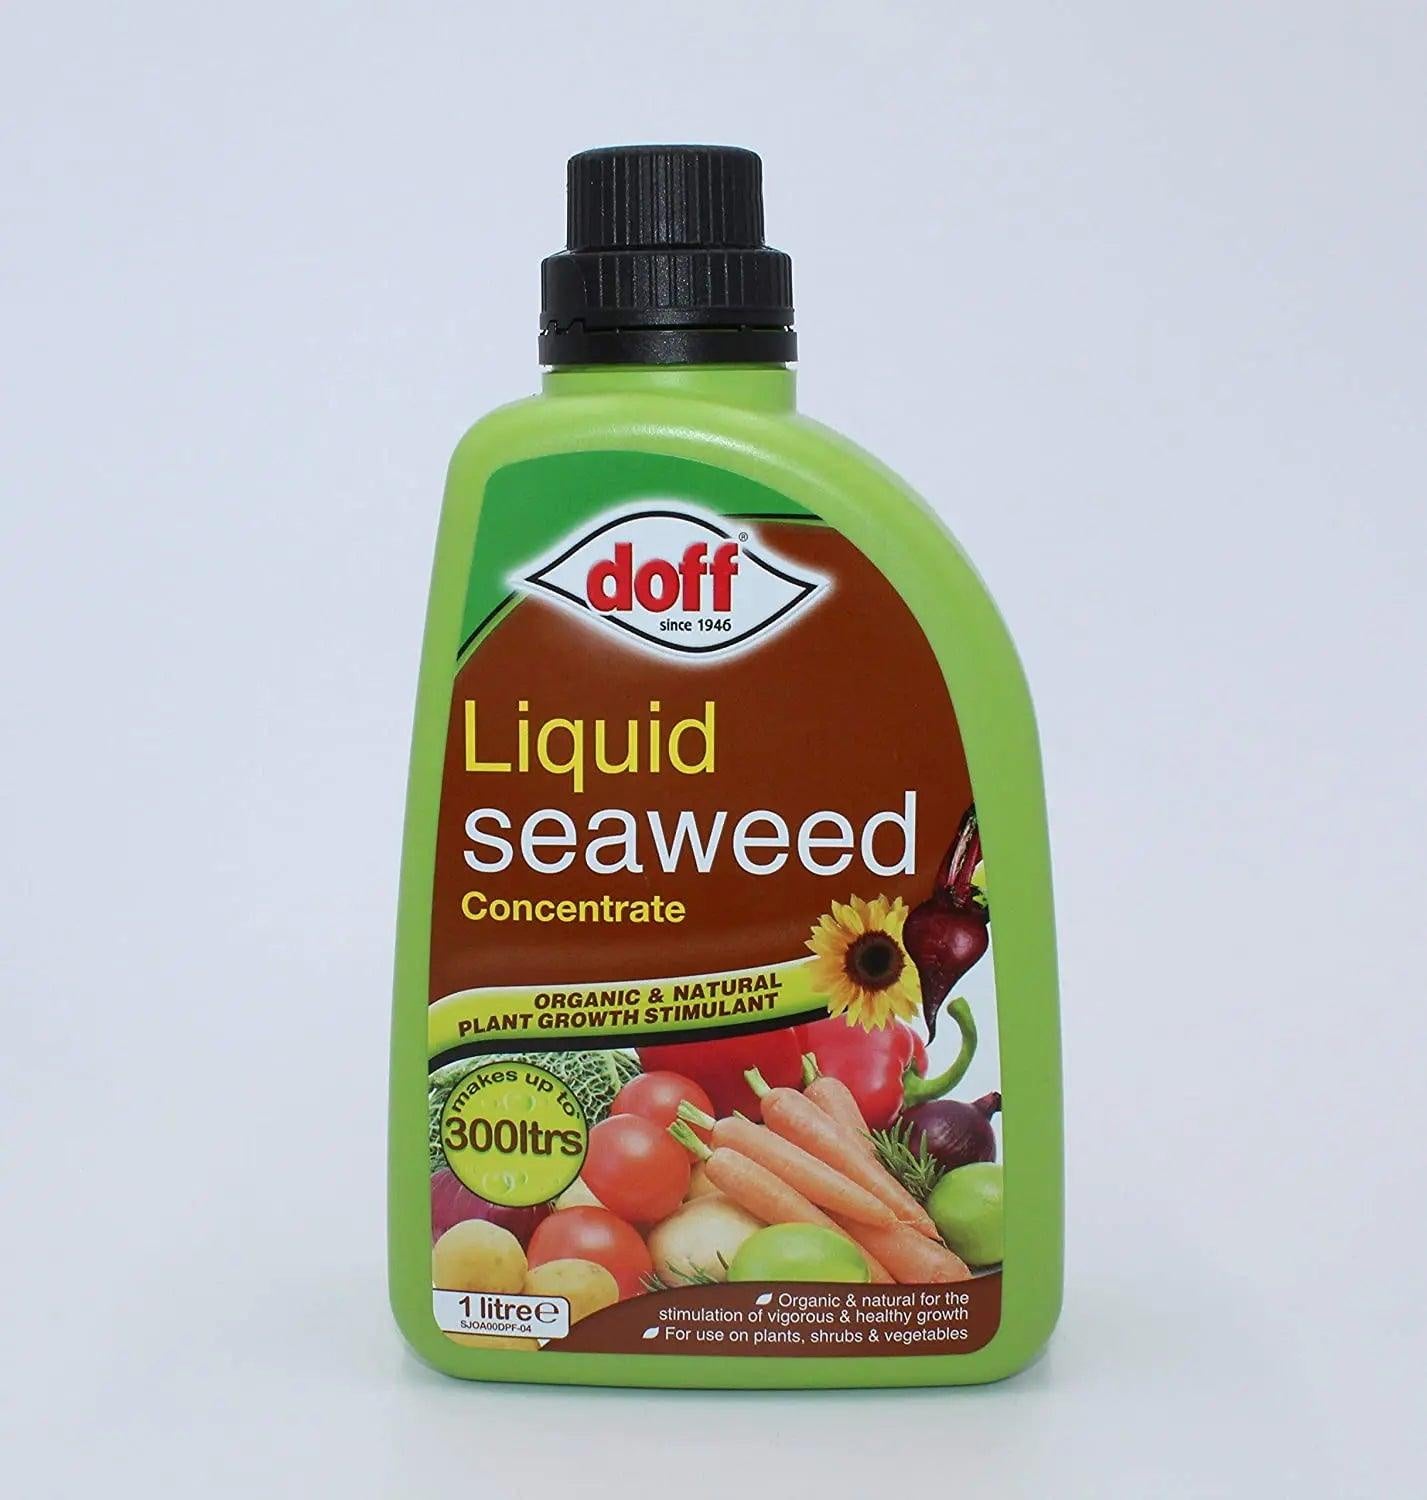 Doff Liquid Seaweed Concentrated Multi-Purpose Feed - 1Litre (2 pack)